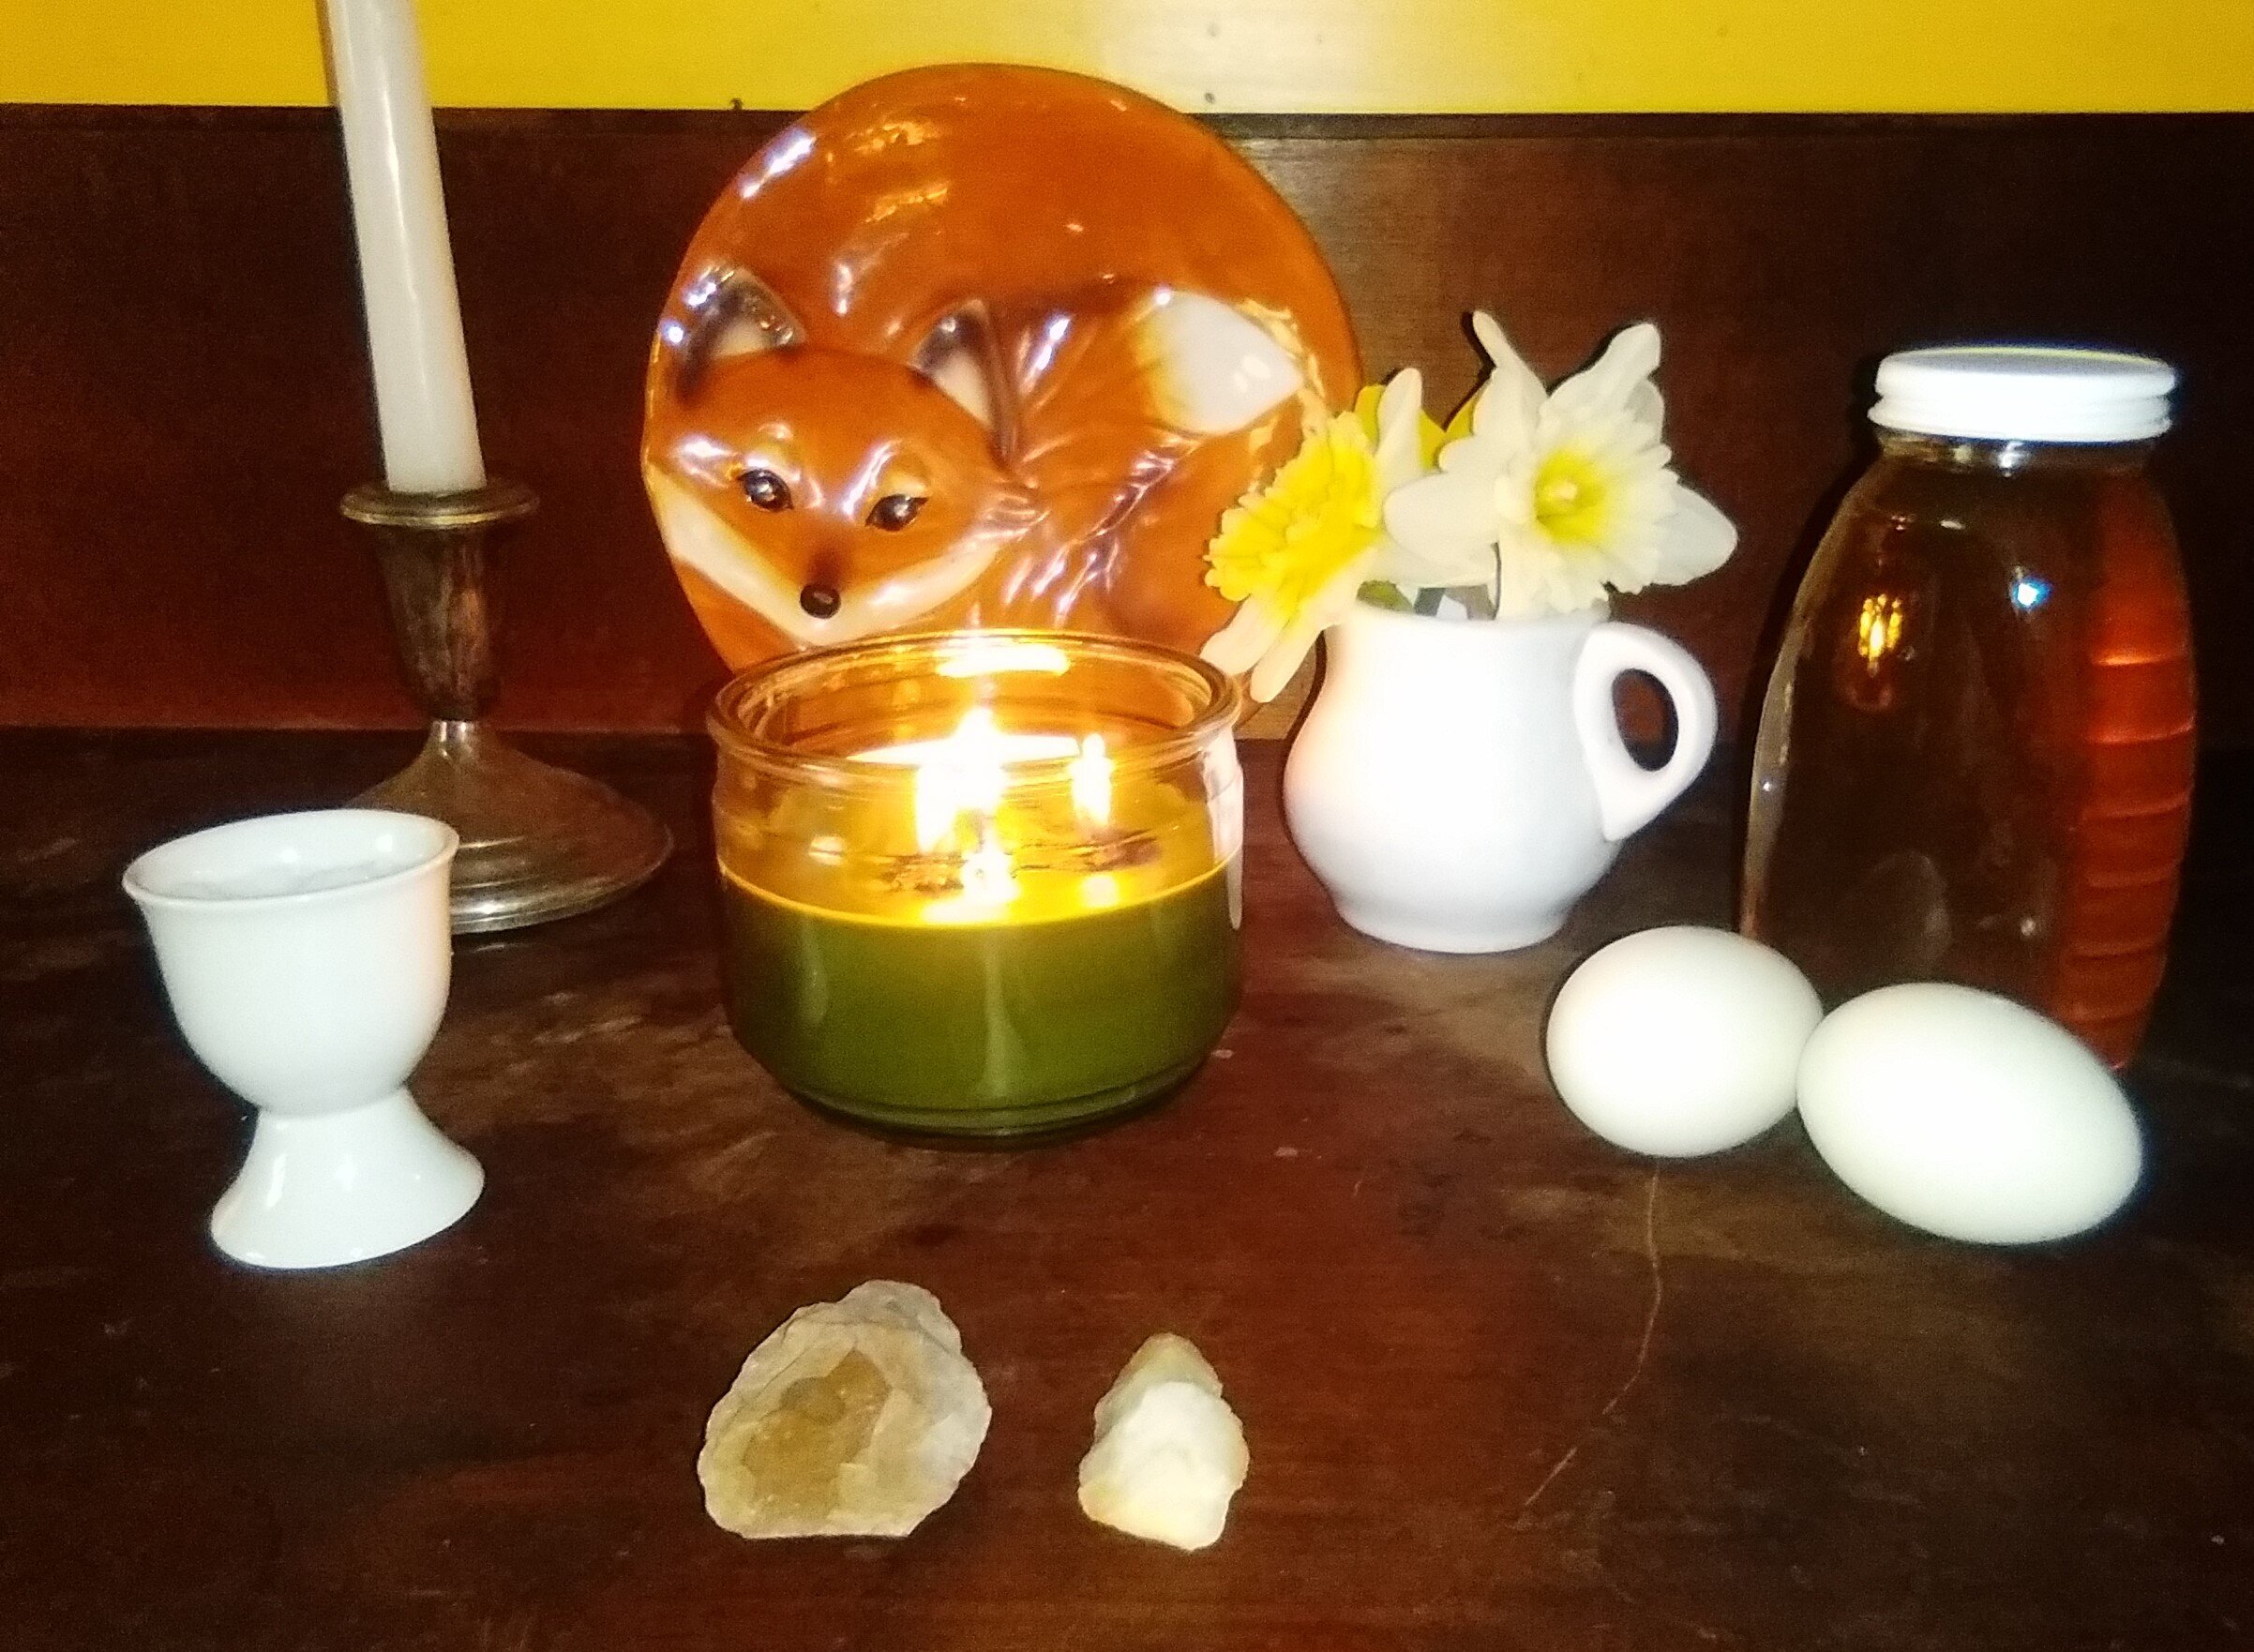 Altar to welcome spring. Here I have a green candle for growth and fertility . The white candle represents new beginnings. Photo by author.